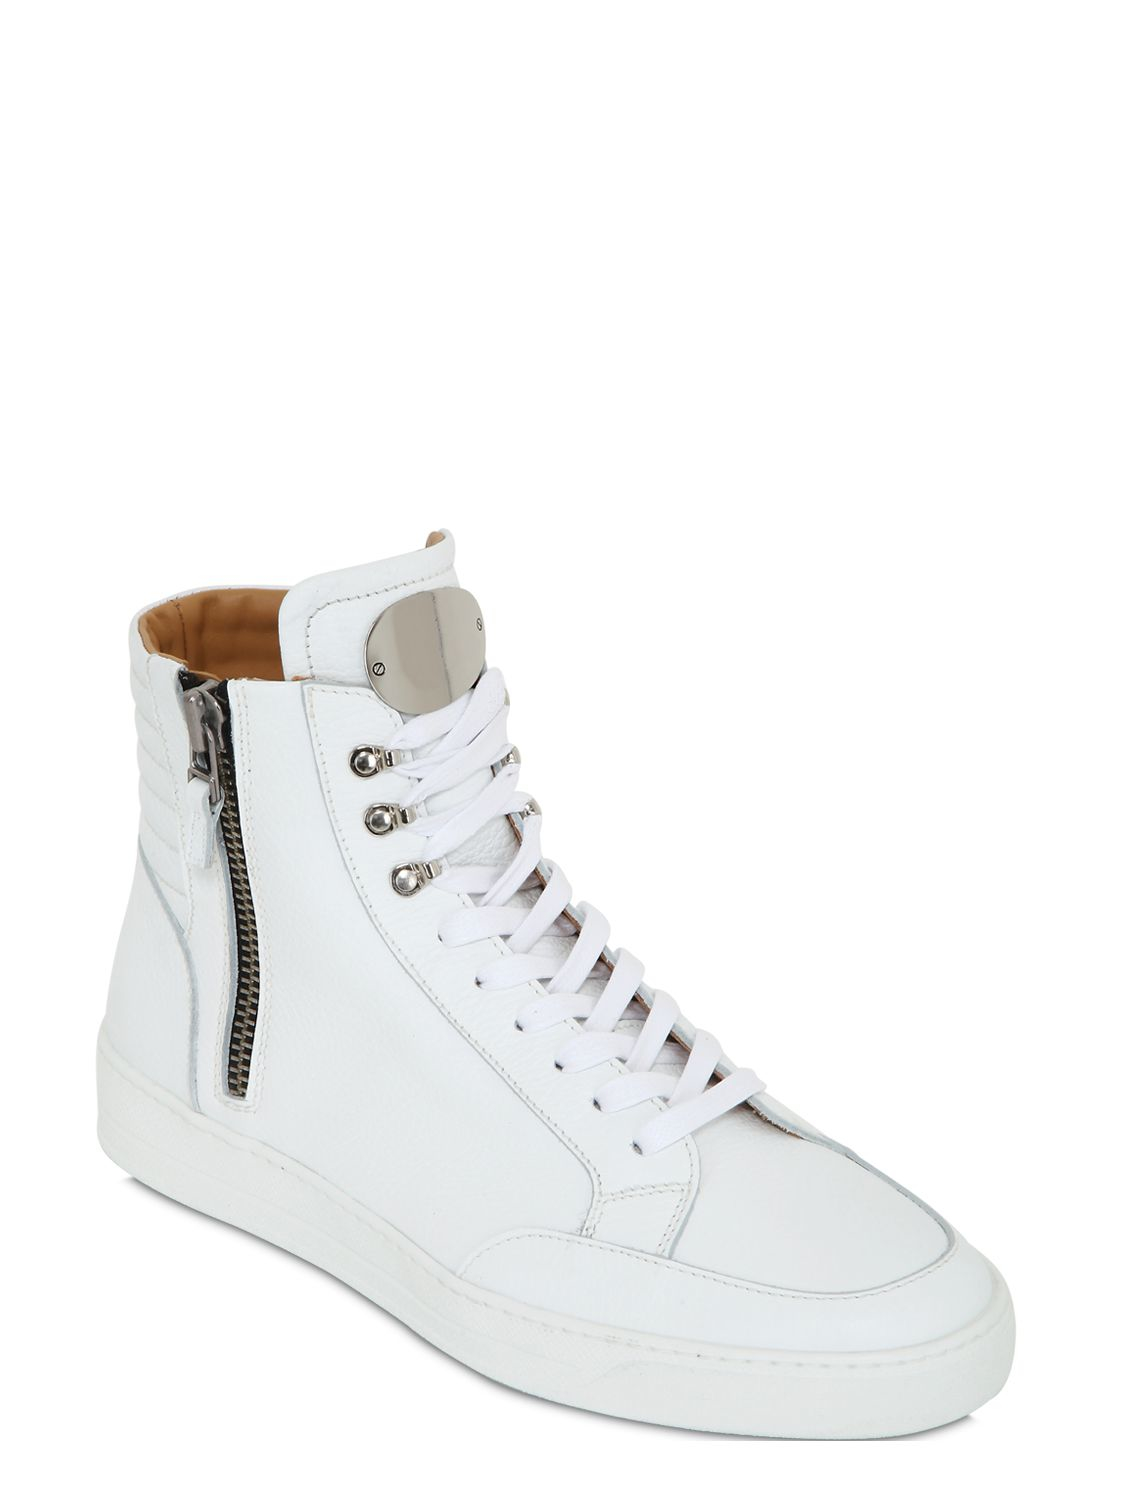 Lyst - Bi_Plus Zip-up Leather High Top Sneakers in White for Men